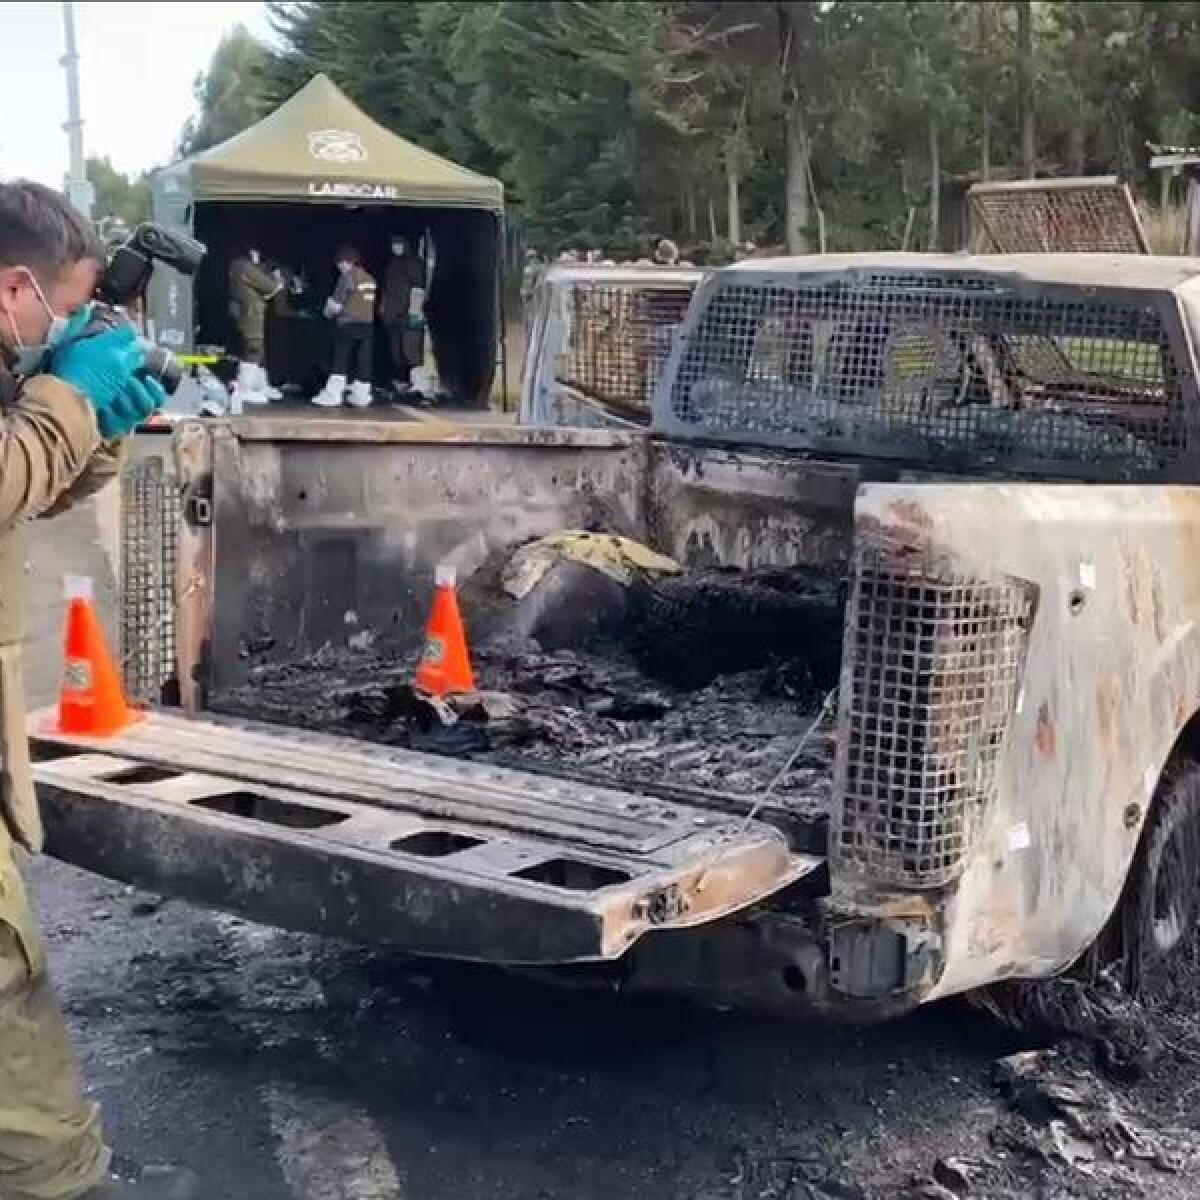 The burnt out police vehicle